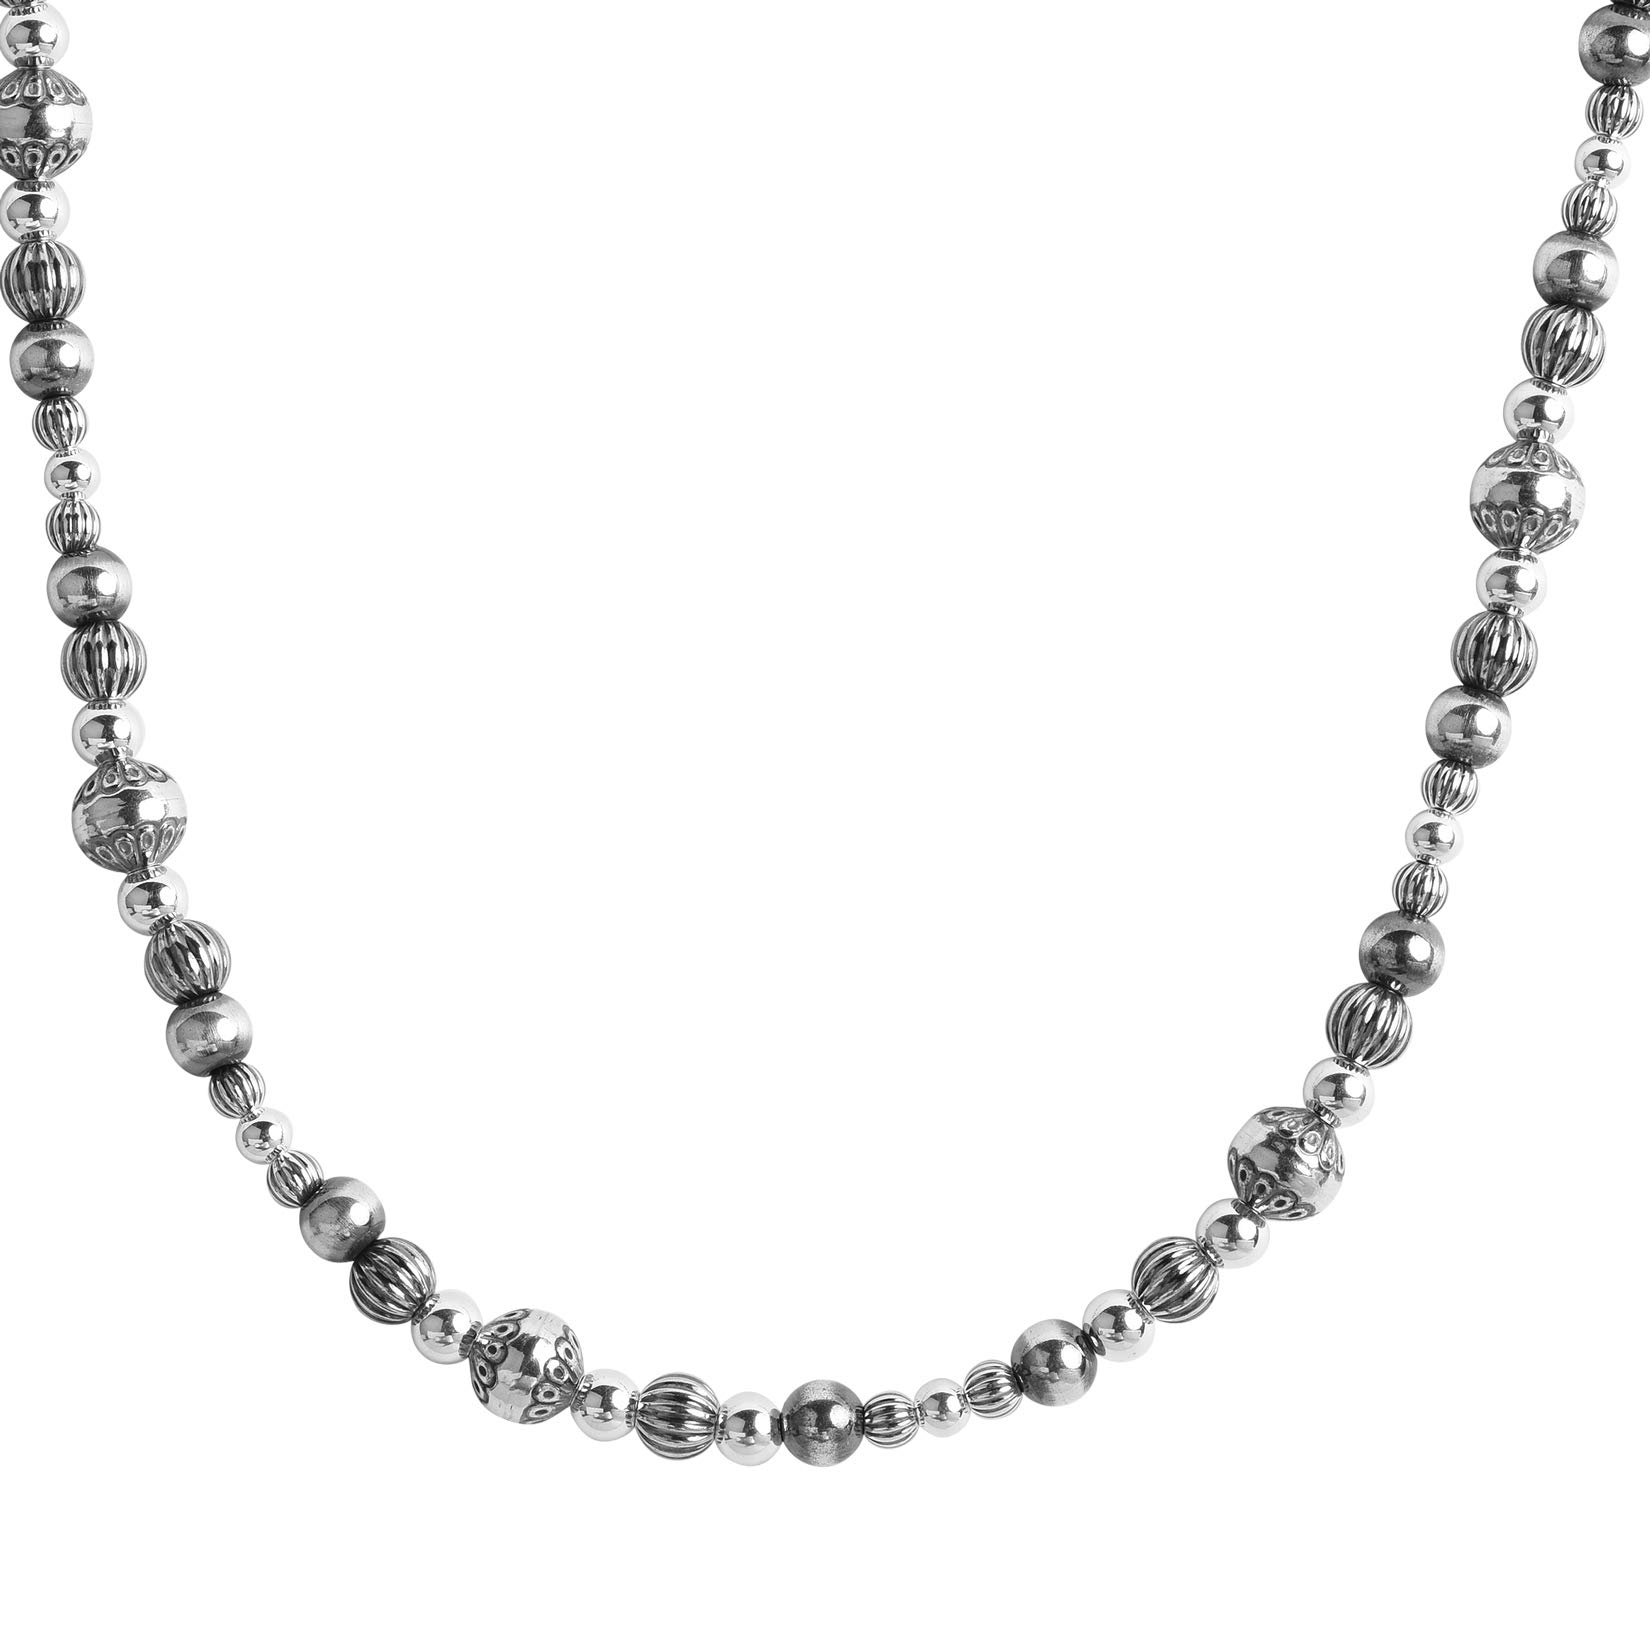 American West Sterling Native Pearl Mixed Beads Necklace 20 Inch